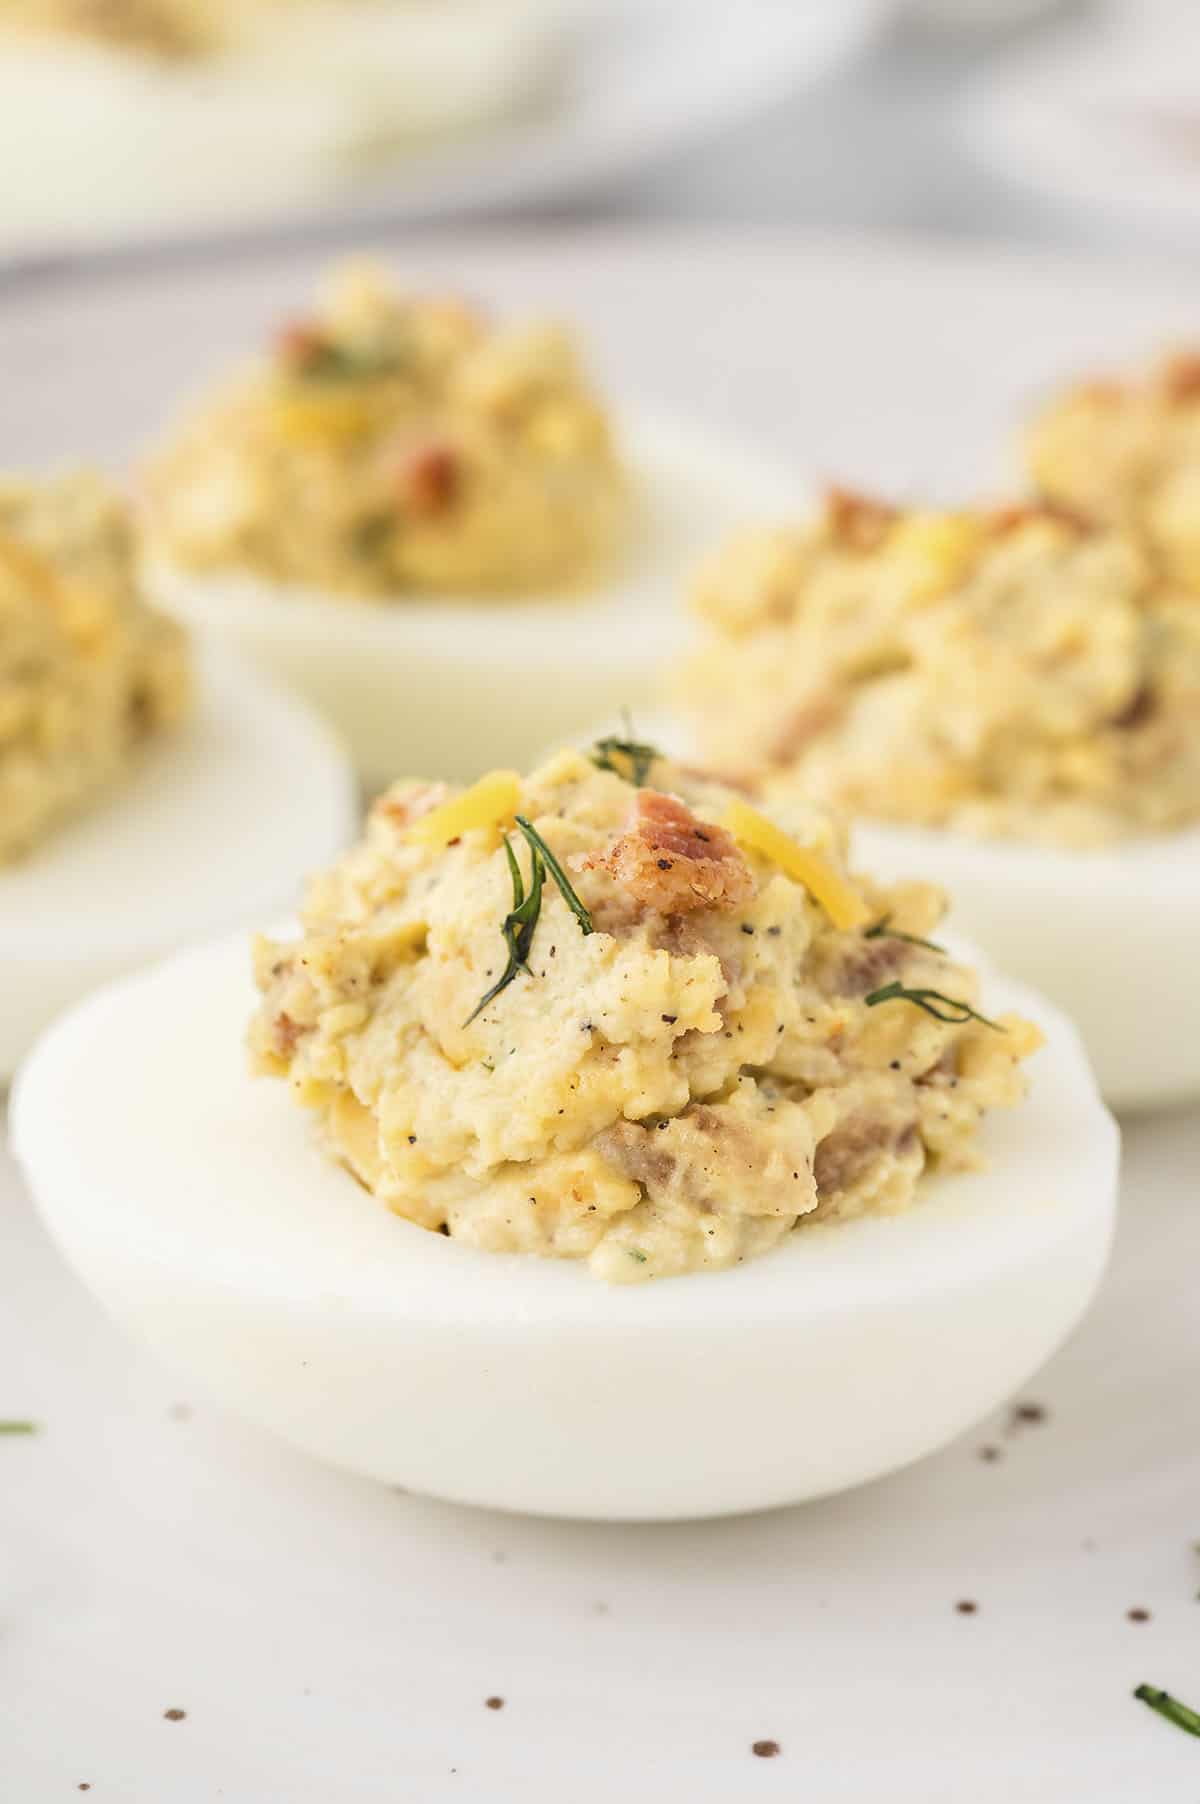 Devilled eggs with bacon and cheddar.